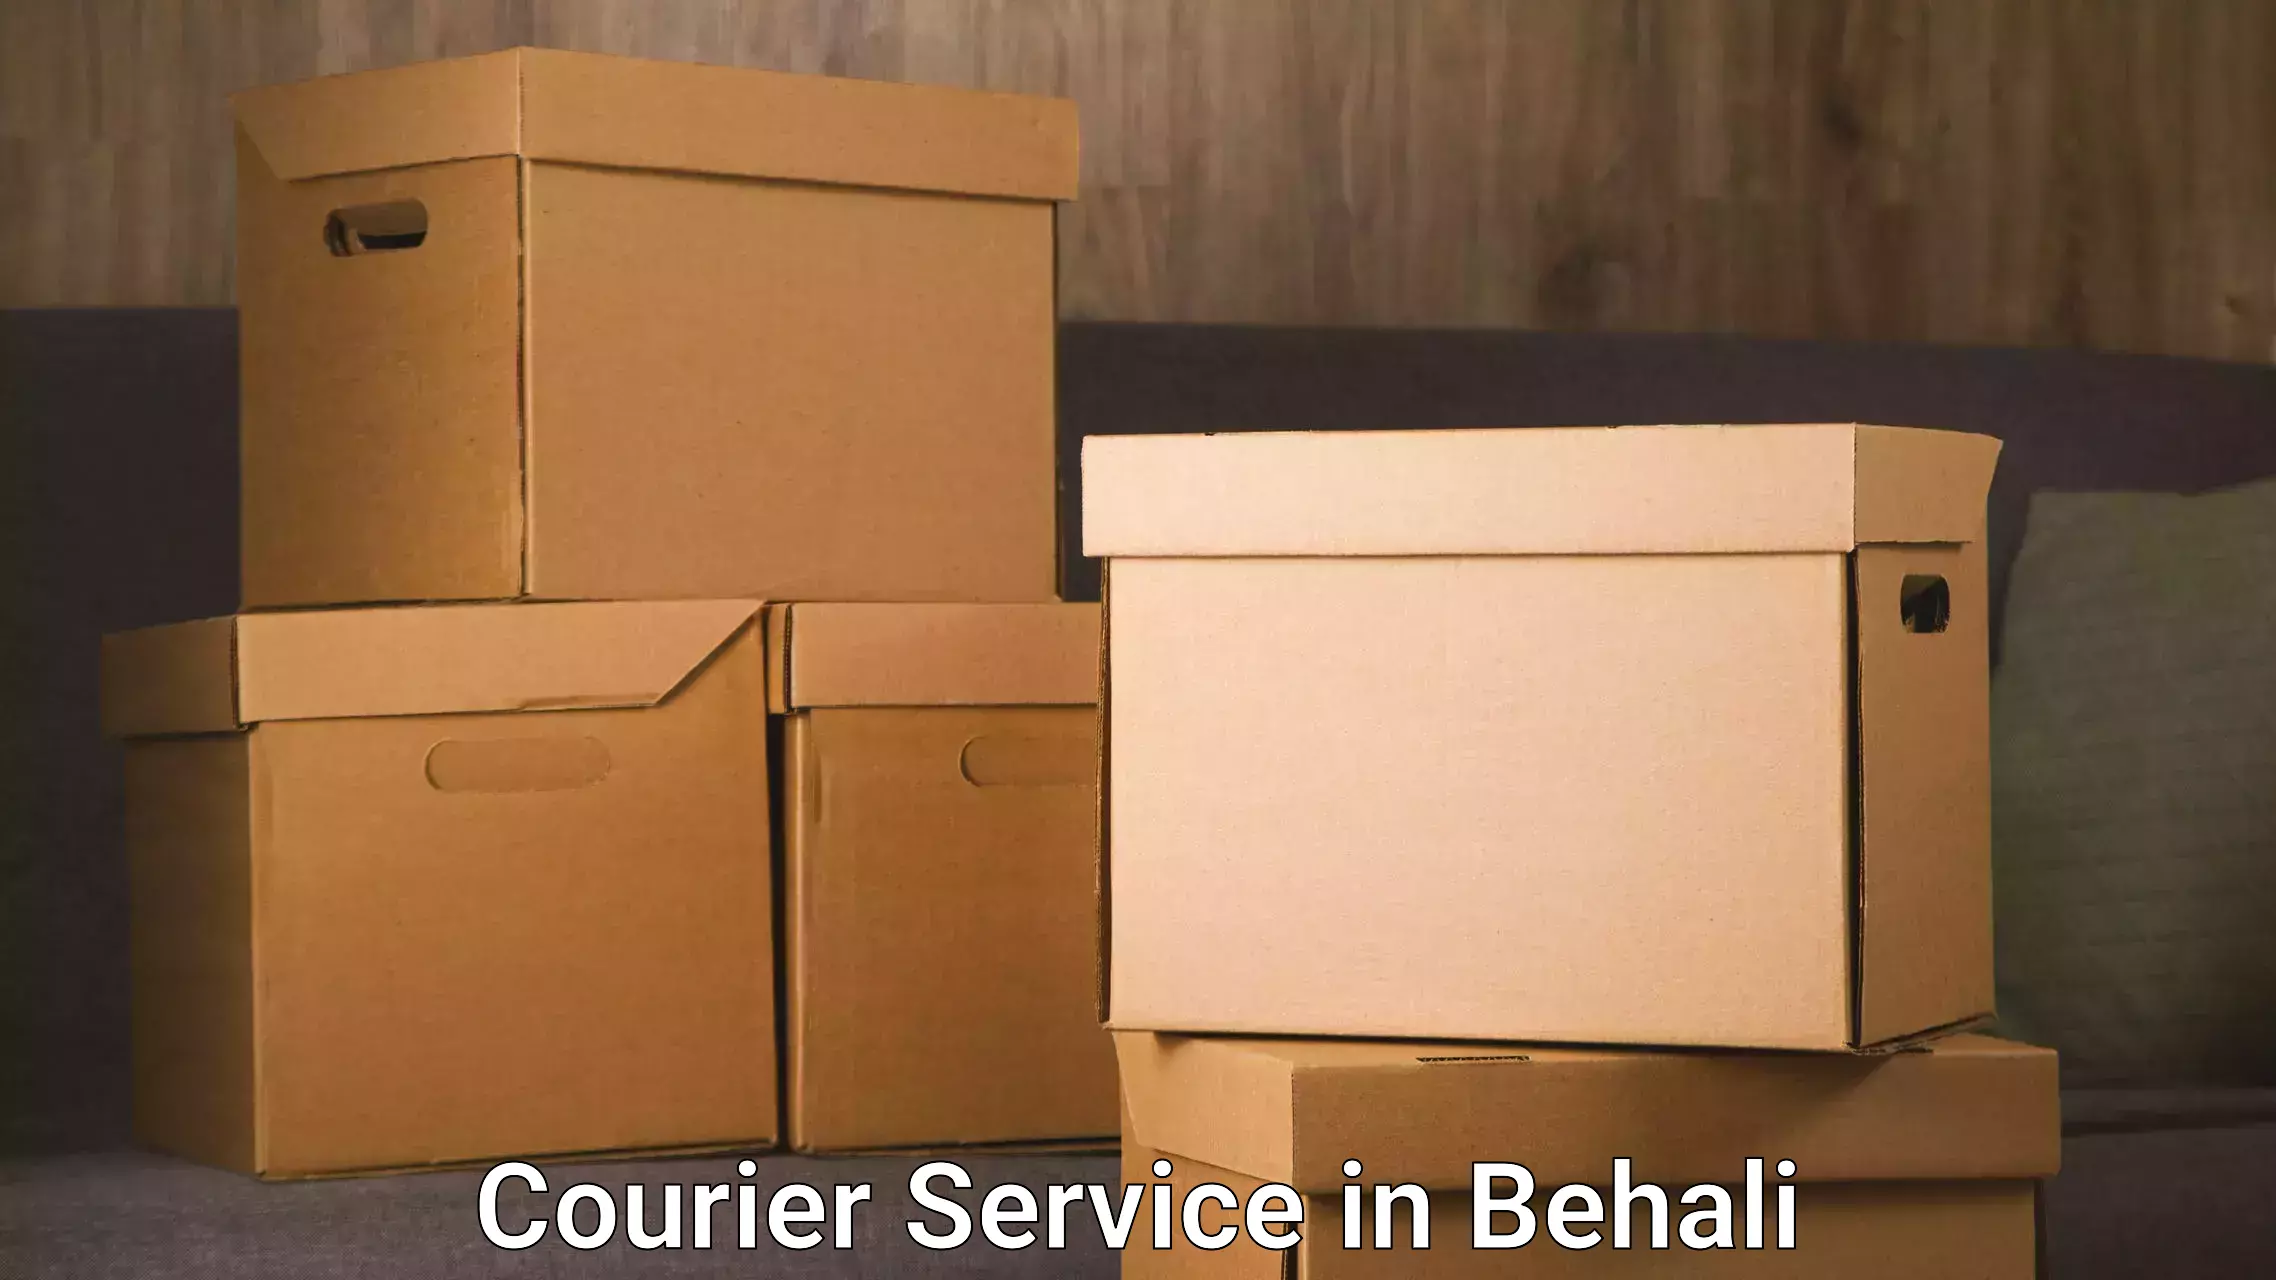 Subscription-based courier in Behali